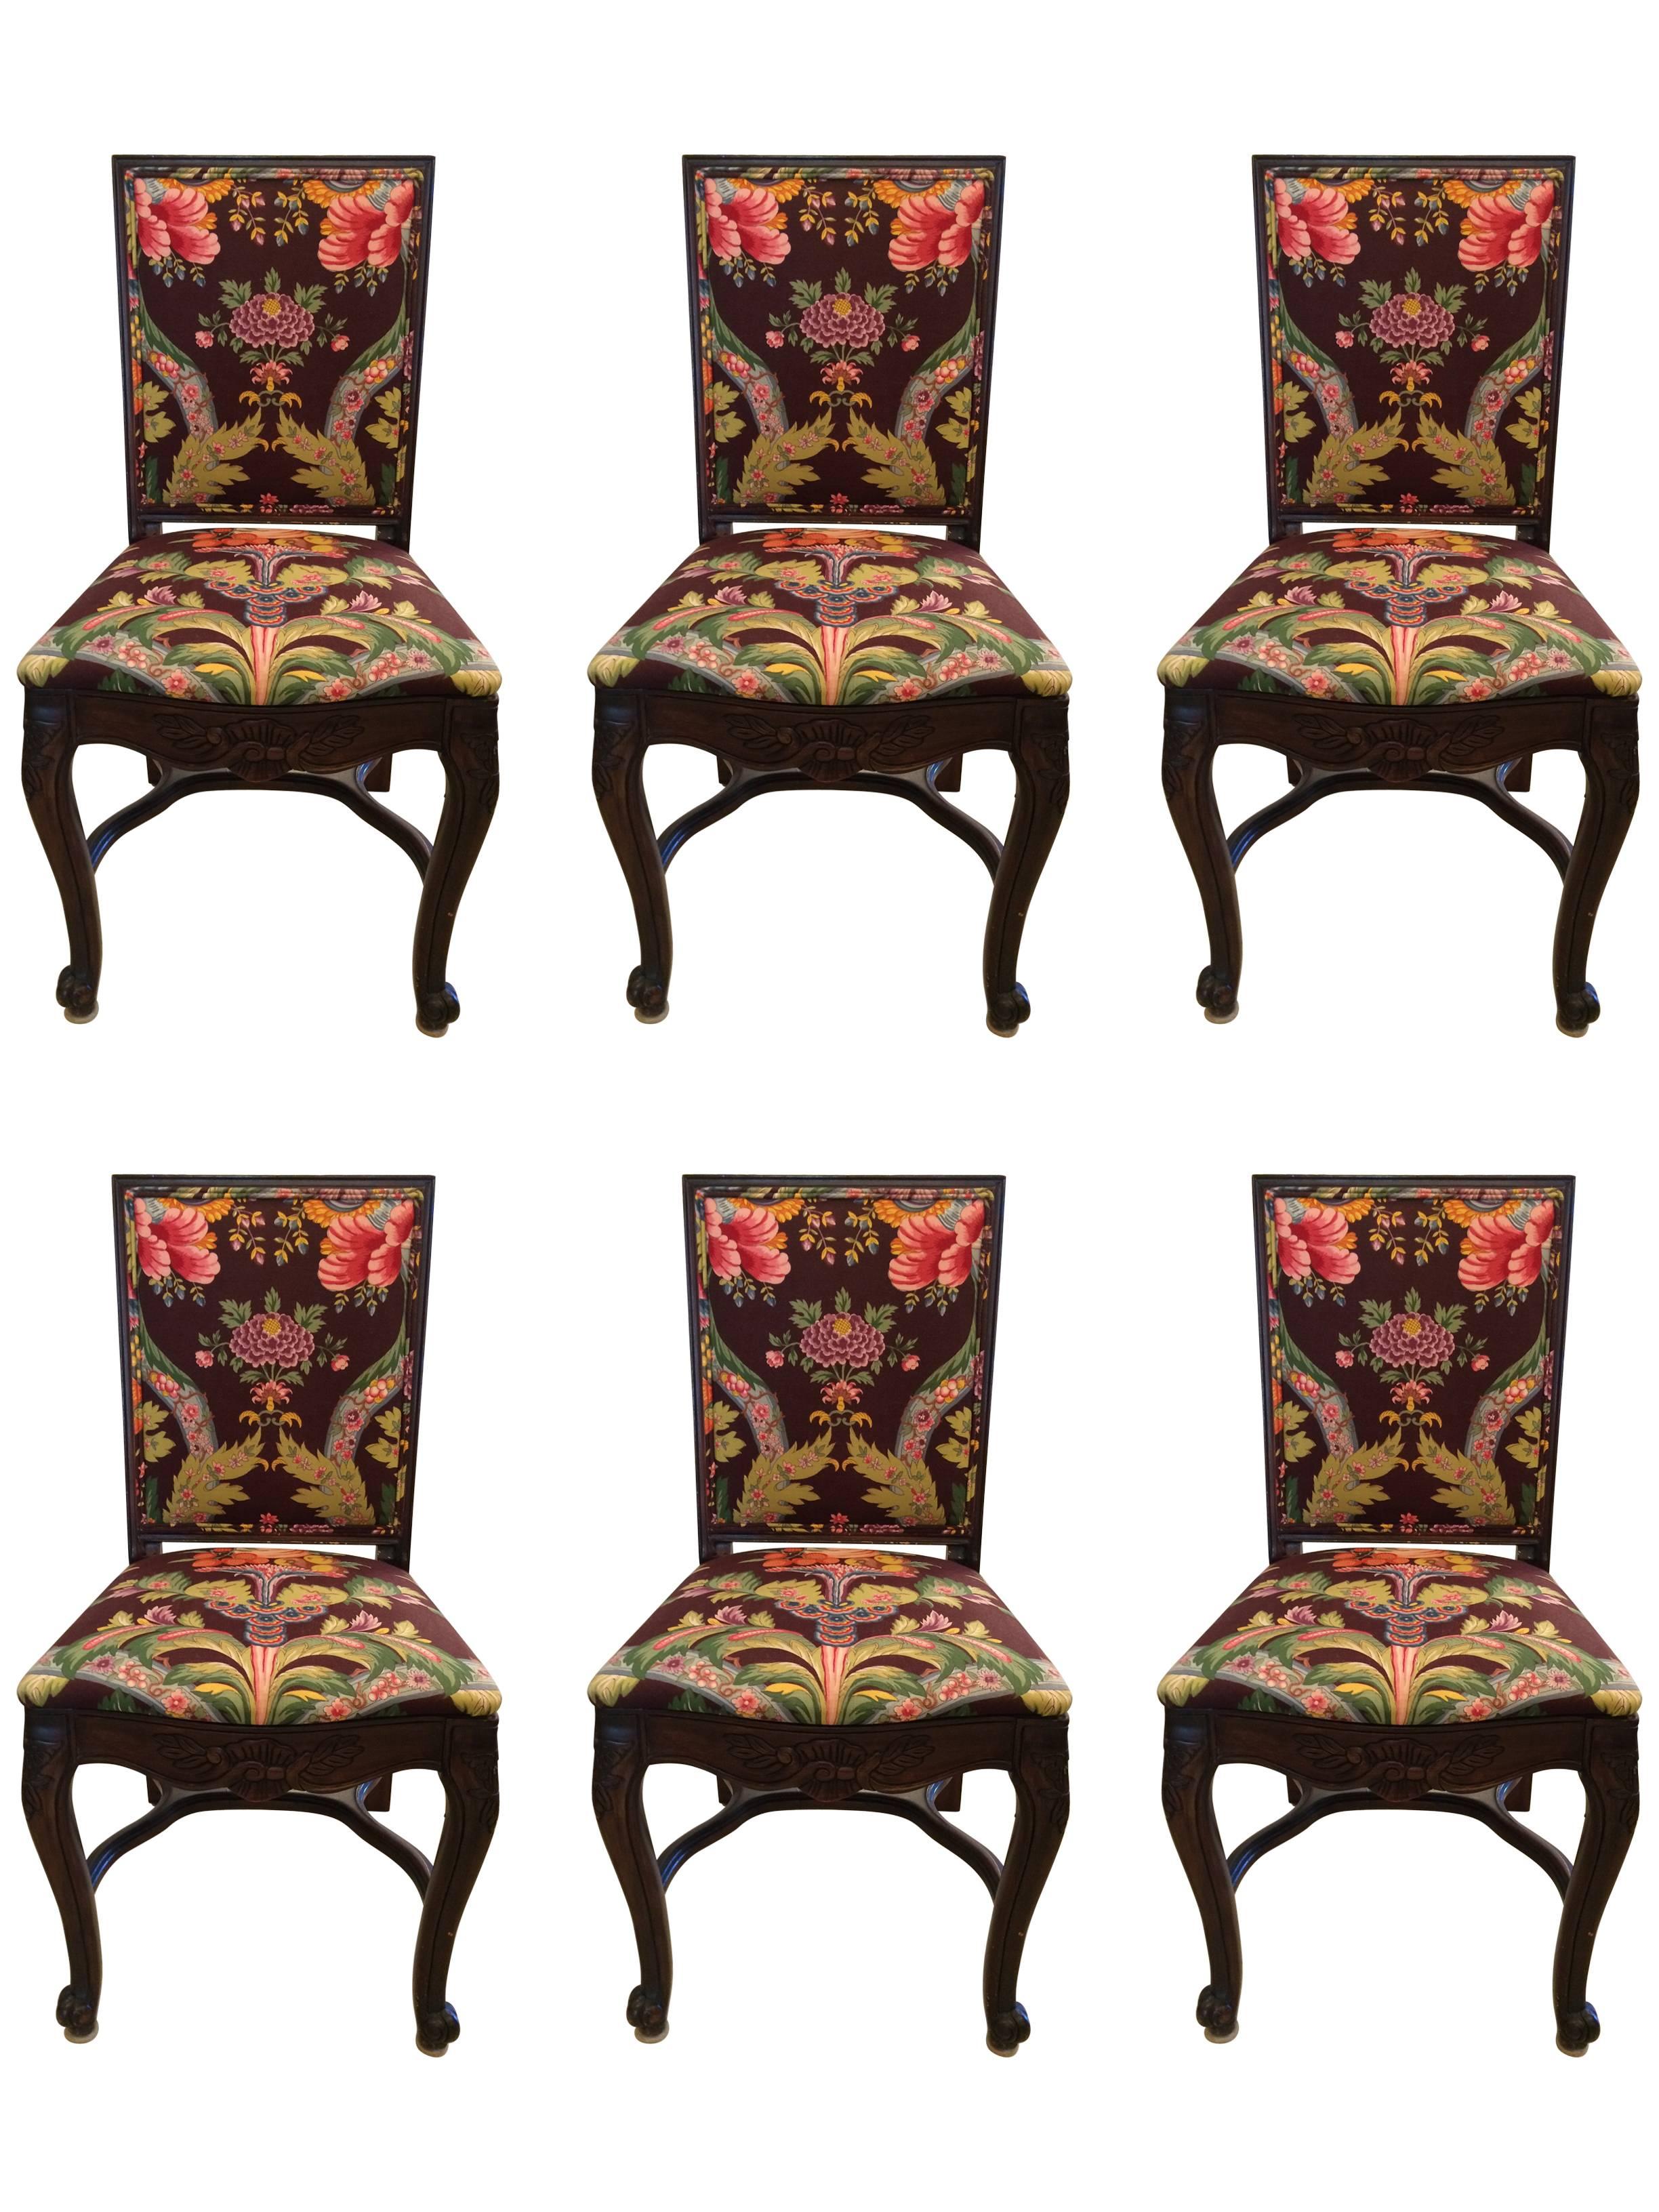 Set of Six Carved Mahogany Dining Chairs with Brunschwig and Fils Upholstery